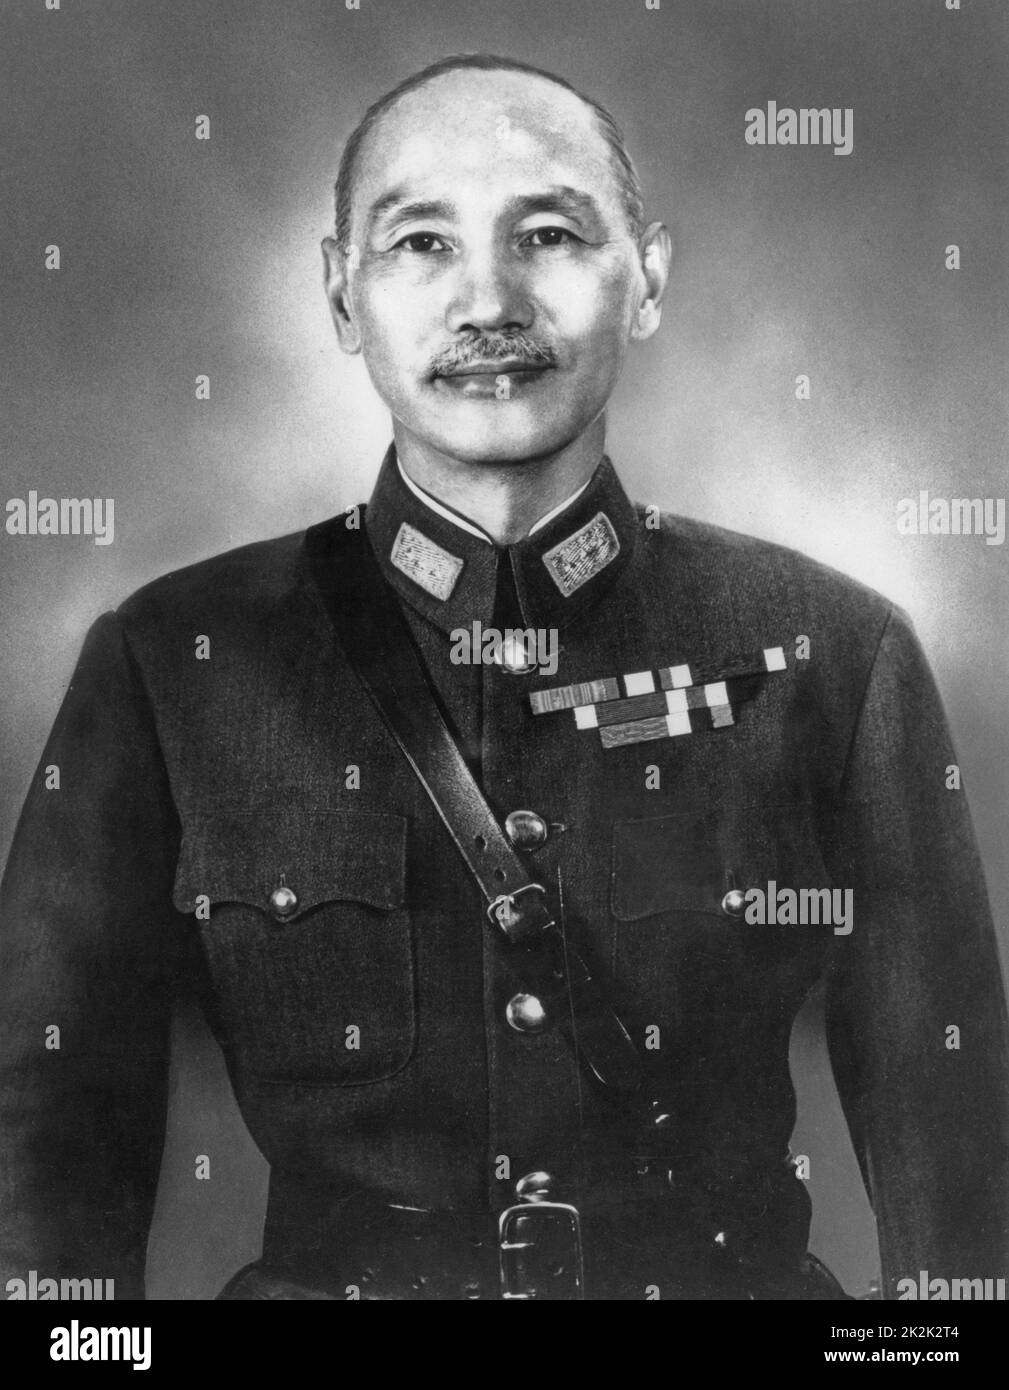 Official portrait of Chiang Kai-shek, Chinese military and statesman representative of the Kuomintang. 1945 Stock Photo